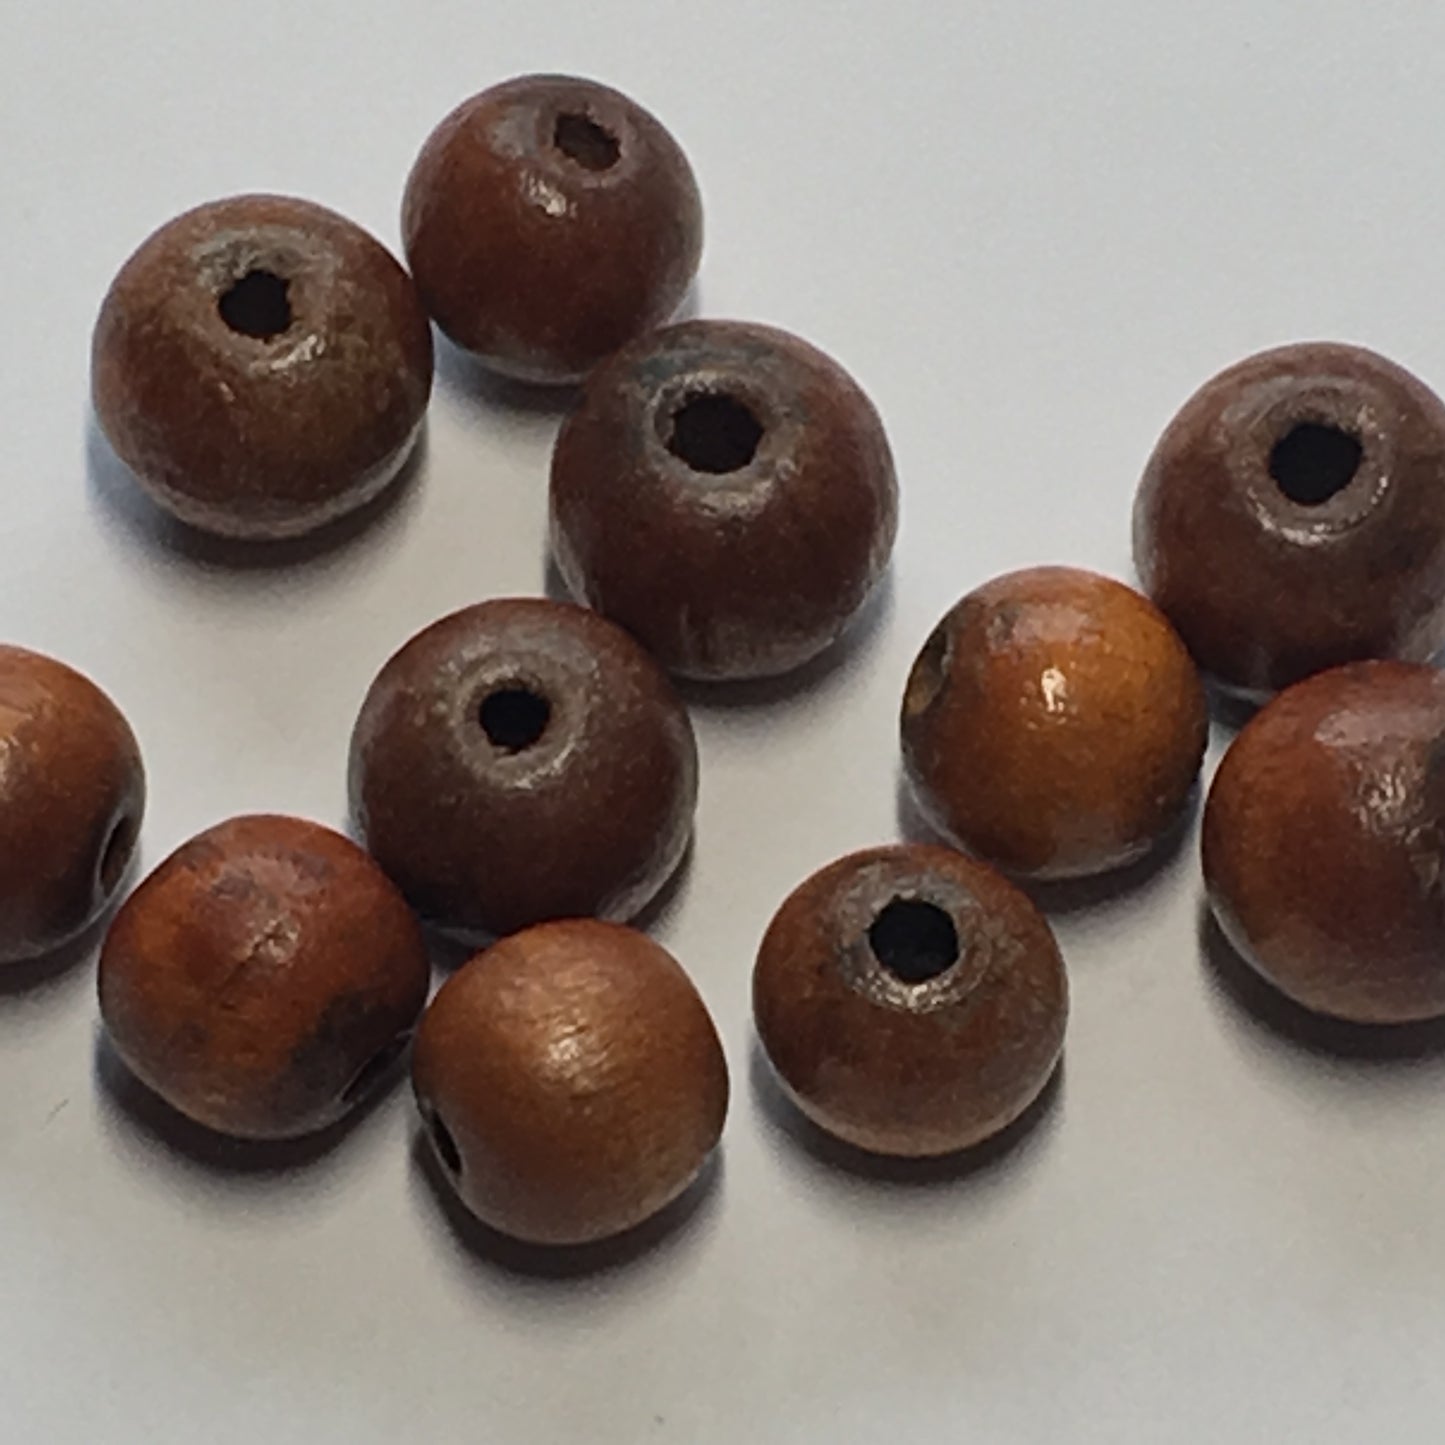 Brown Round Wooden Beads, 10 and 12 mm - 11 Beads